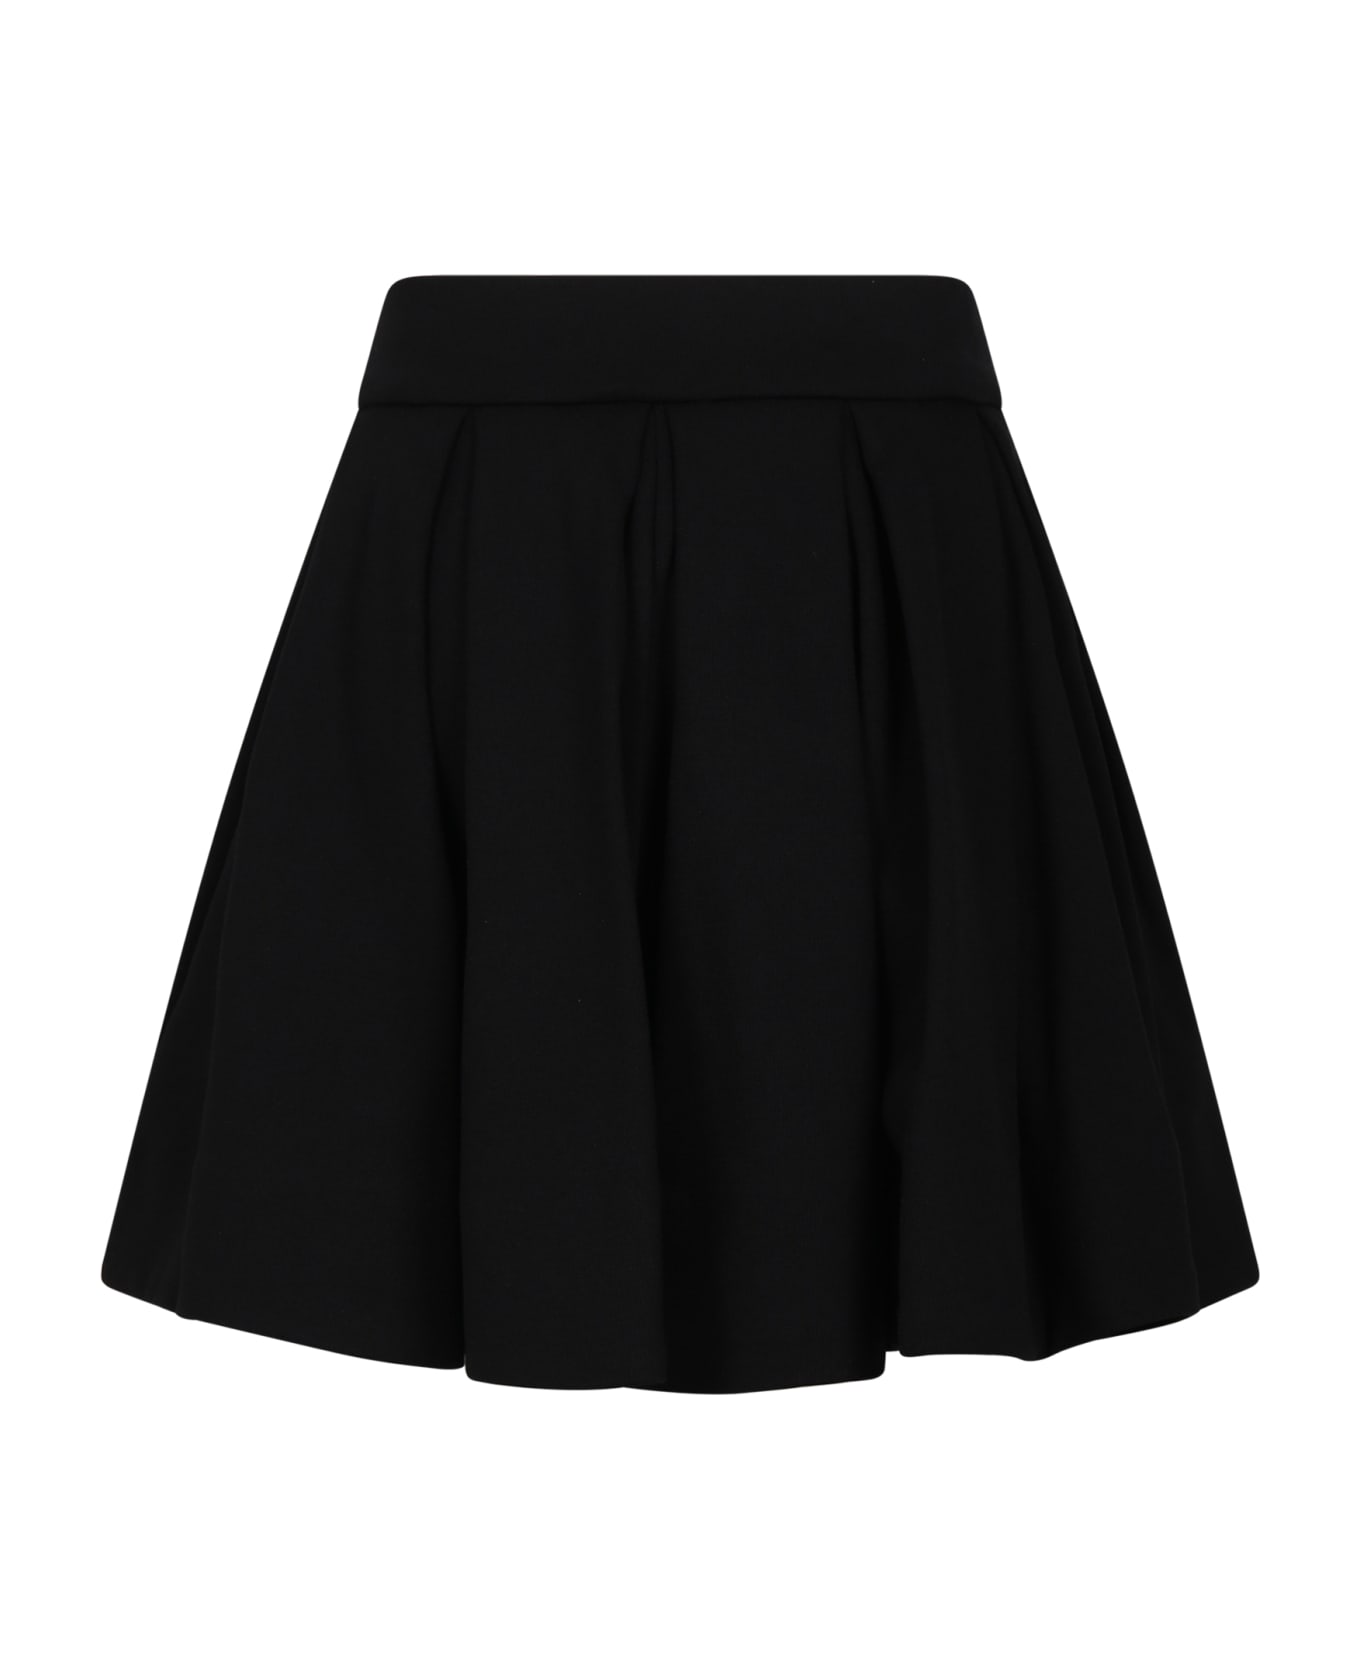 Balmain Black Skirt For Girl With Iconic Buttons - Black